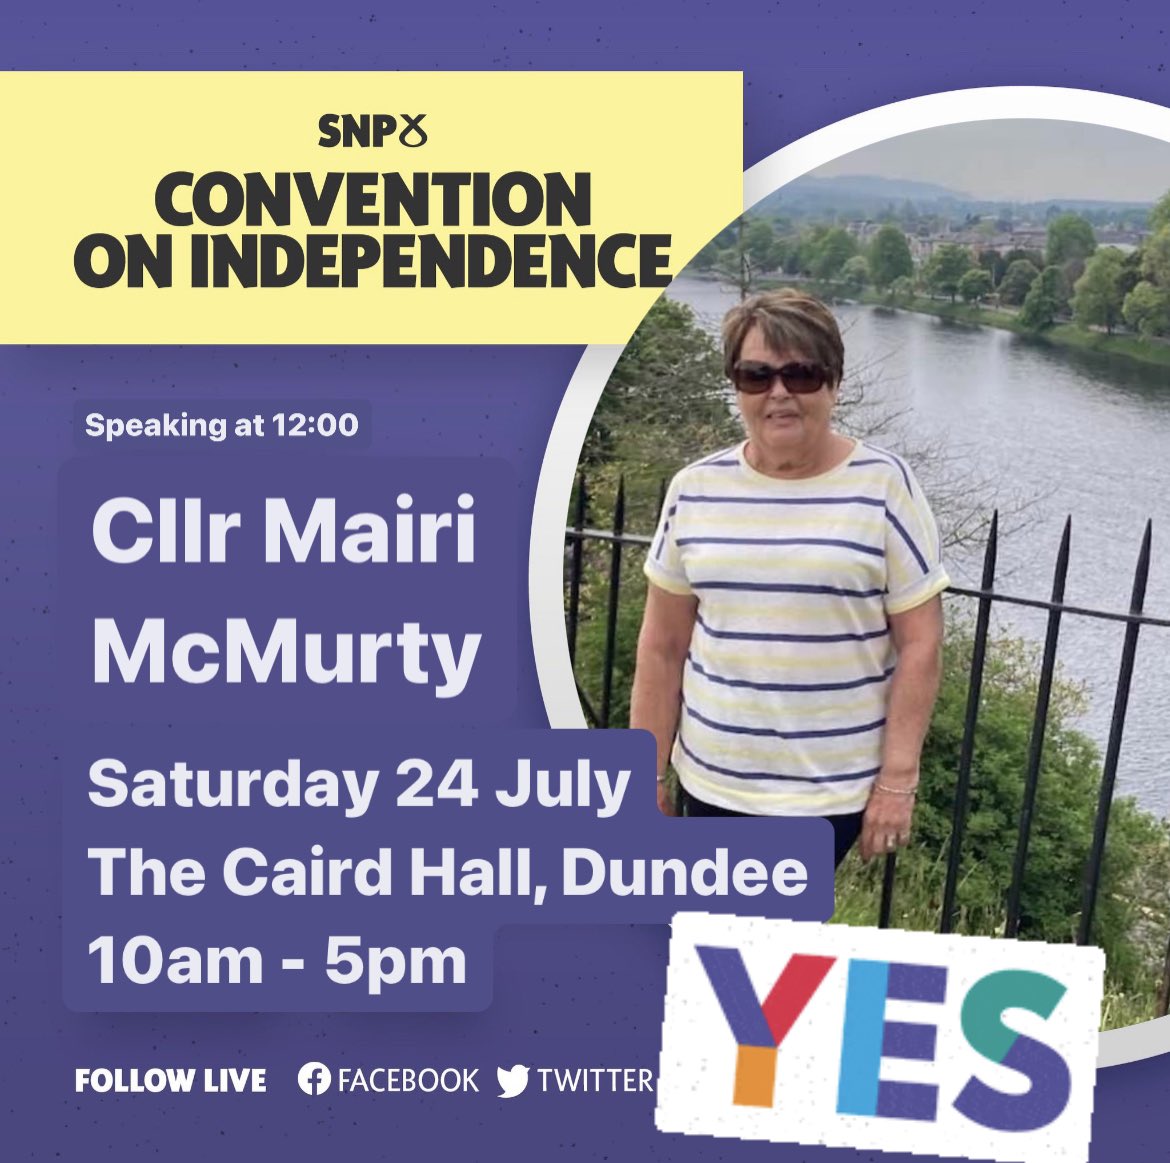 I am delighted to be invited to speak at the Convention on Independence on Saturday 👏🏼 🏴󠁧󠁢󠁳󠁣󠁴󠁿

I will be talking about how it’s important to boycott retailers displaying the Union Jack on Scottish produce and why Gaelic should be mandatory in all primary schools 🏴󠁧󠁢󠁳󠁣󠁴󠁿

#IndyCon #SNP